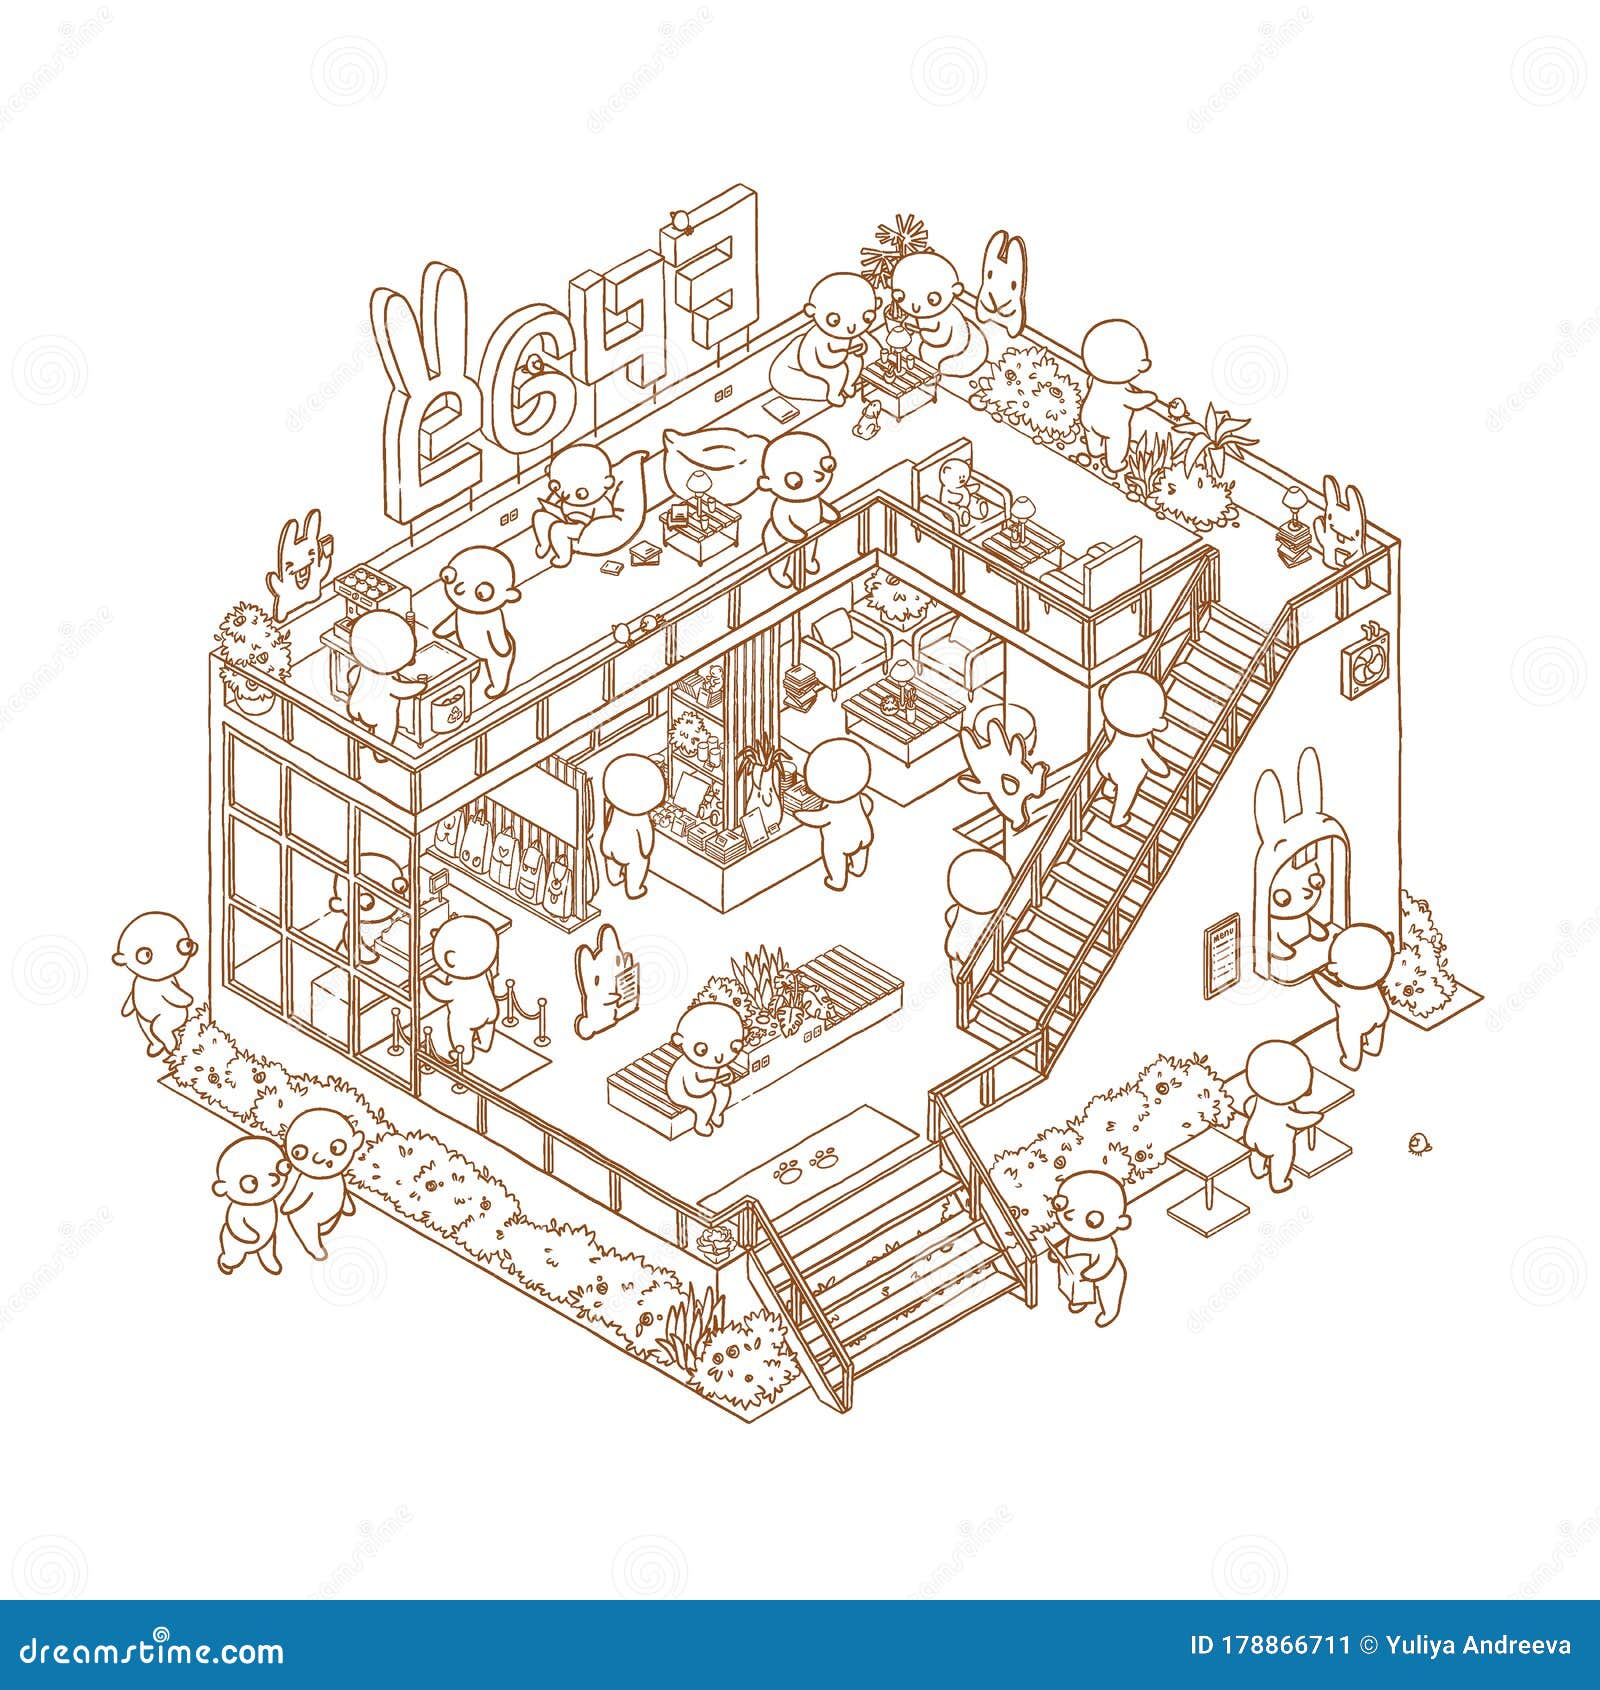 Download Cartoon Isometric Outline Cafe Interior. Hand Drawn Coloring Book Page Of 3d Restaurant Space ...